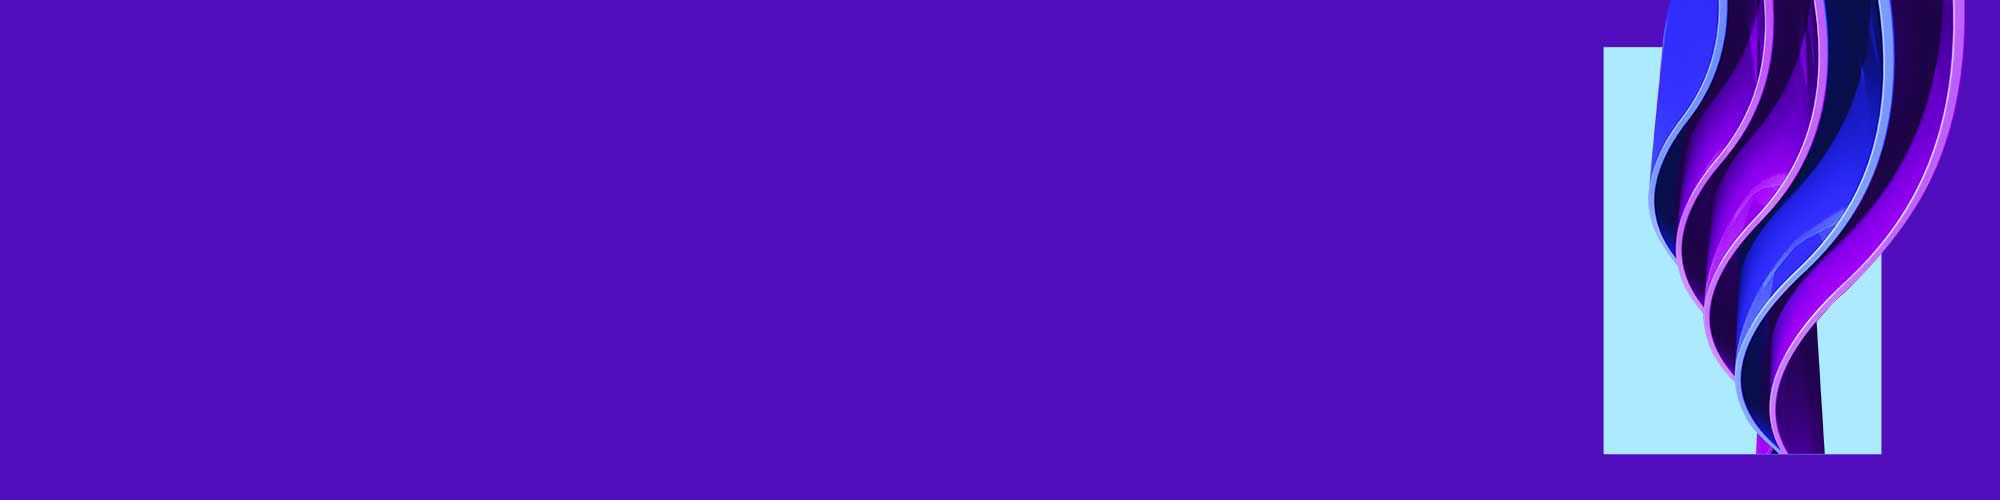 blue-and-purple-wave